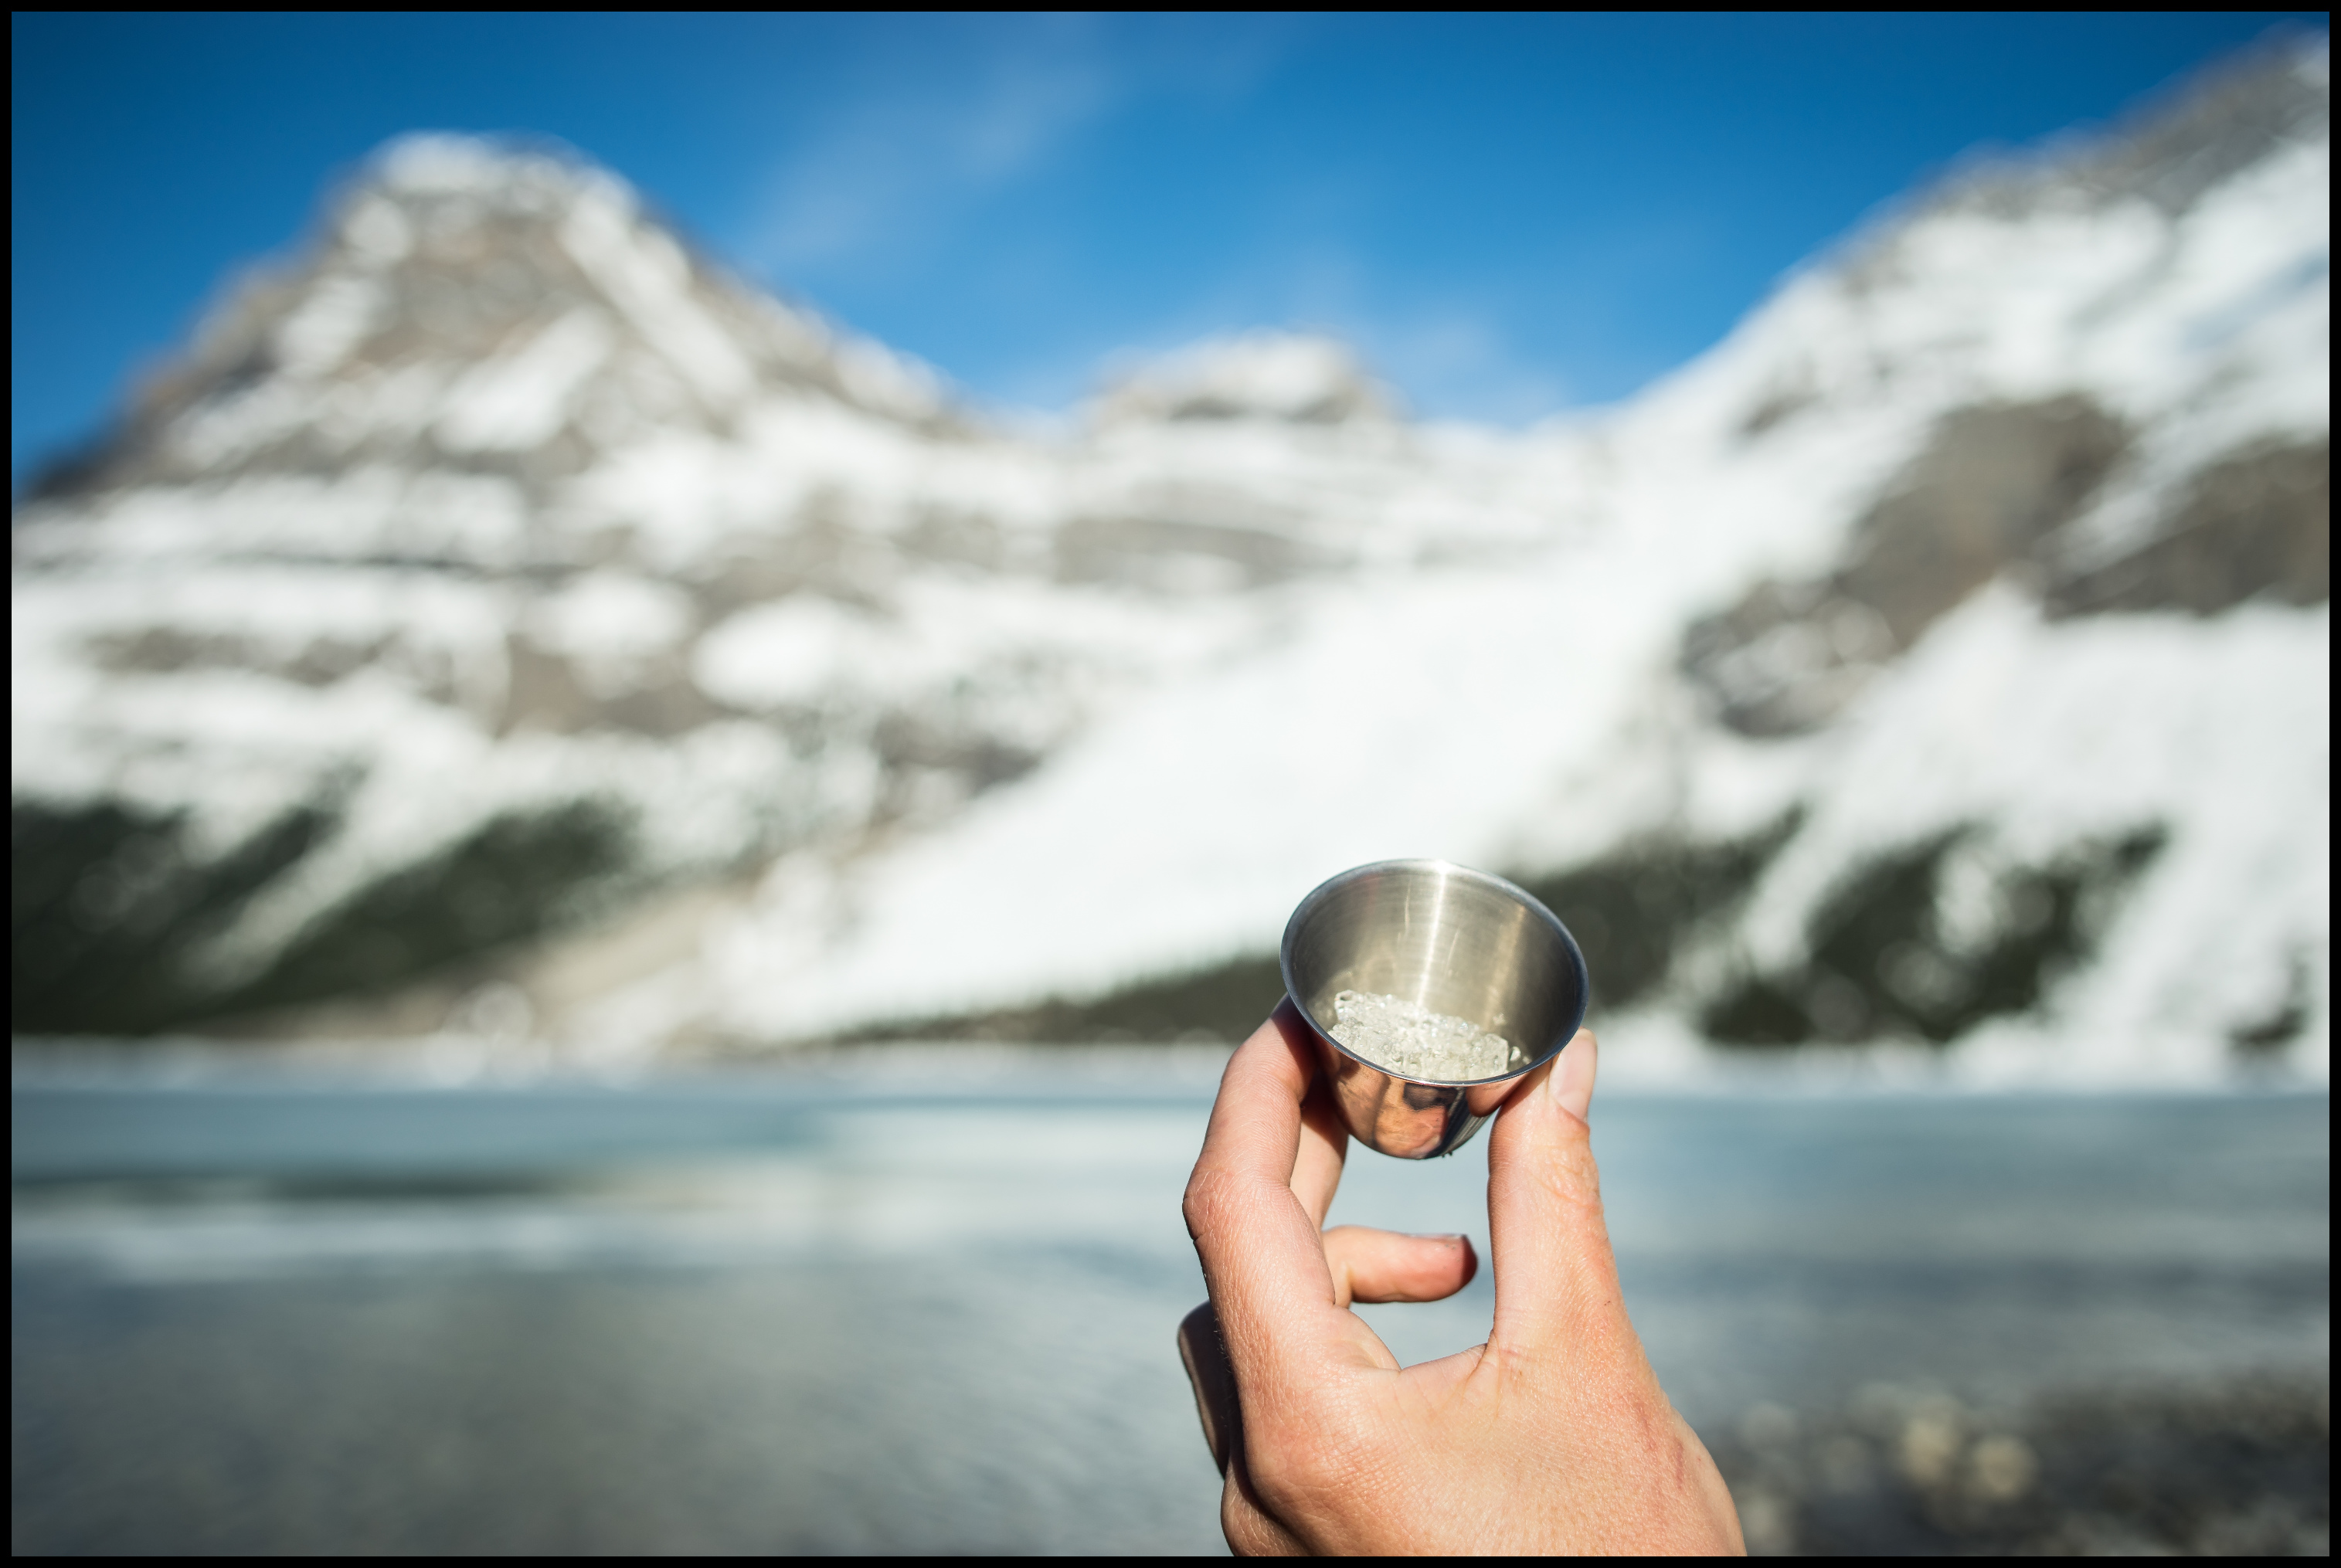 Doesn't taste right without glacier ice :) Berg Lake / Marmot campsite Sony A7 / Canon FD Tilt Shift 35 2.8